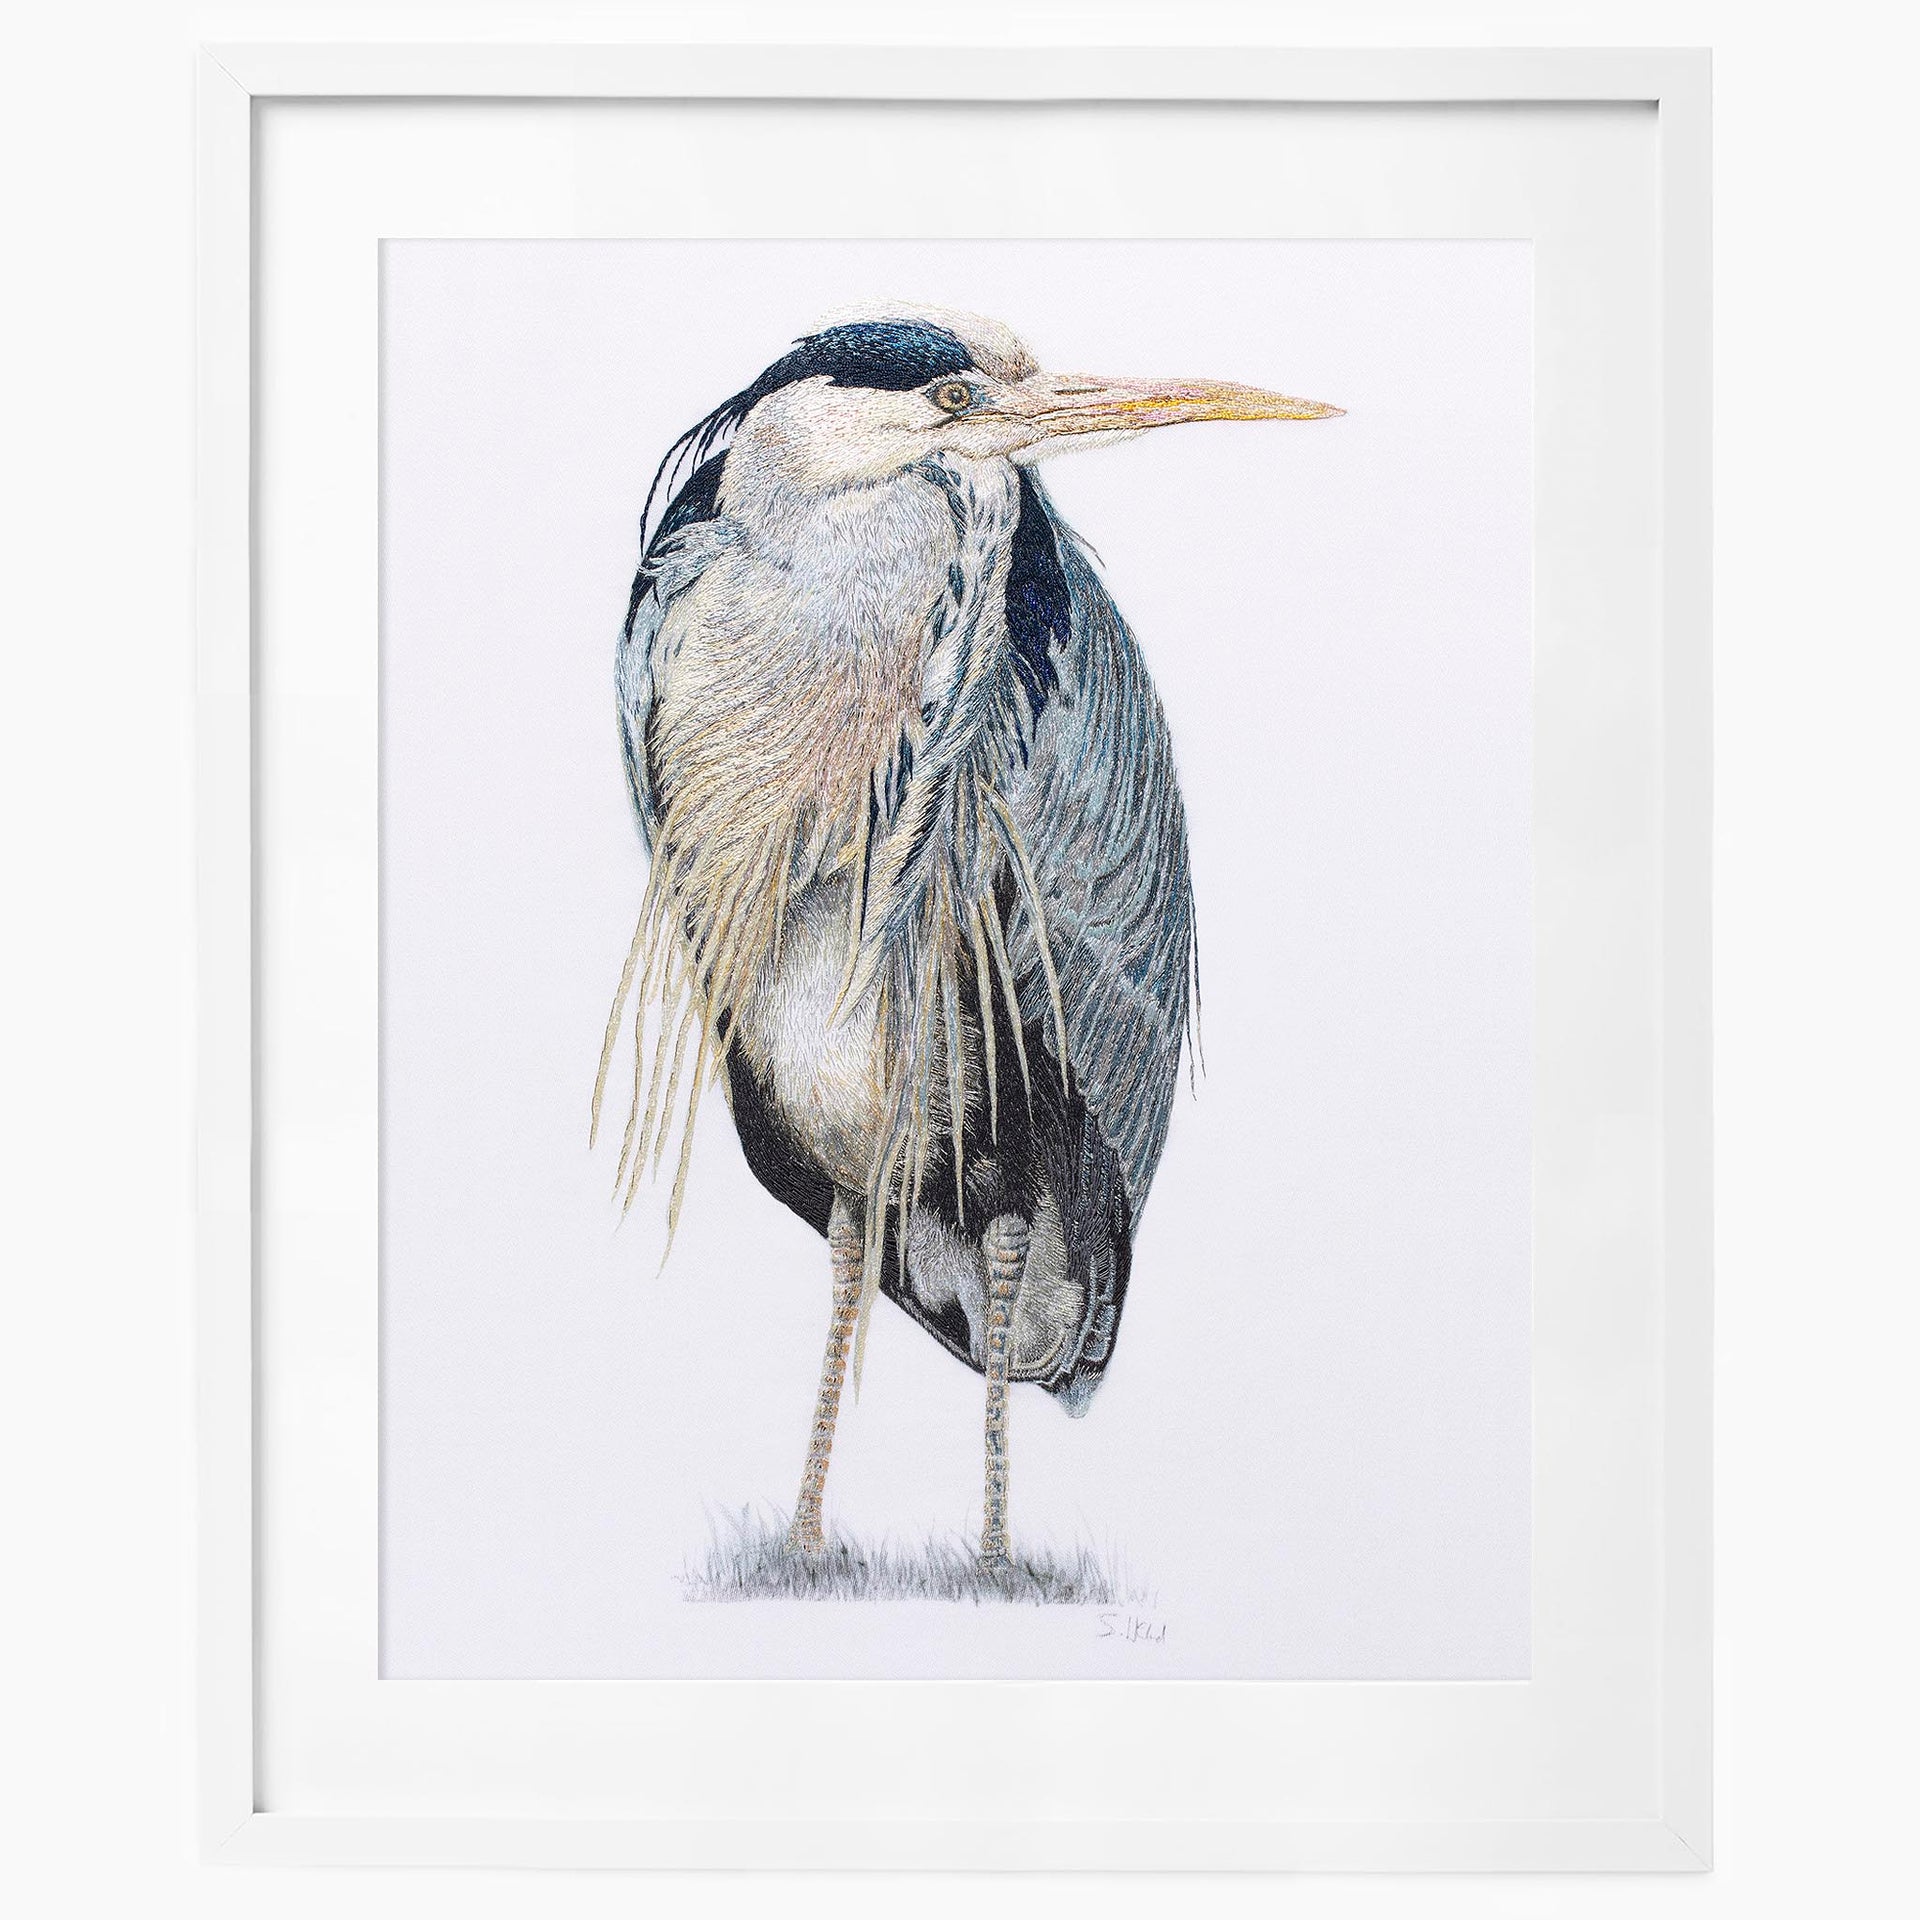 Heron hand embroidered limited edition print in white frame